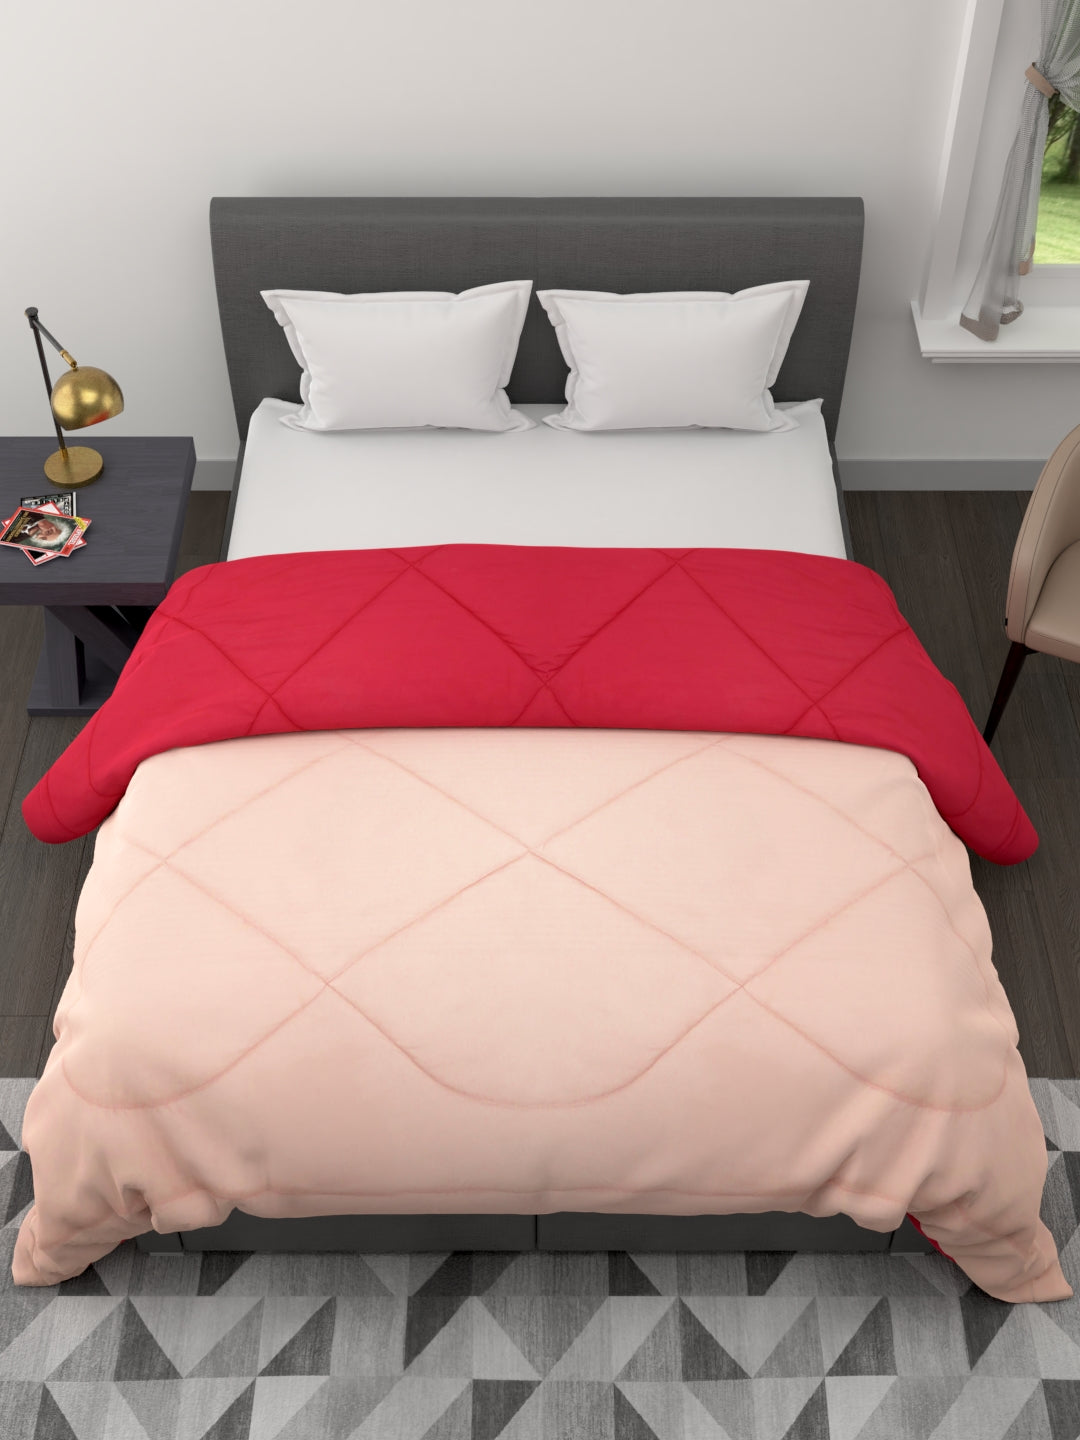 Reversible Double Bed King Size Comforter; 90x100 Inches; Peach & Pink